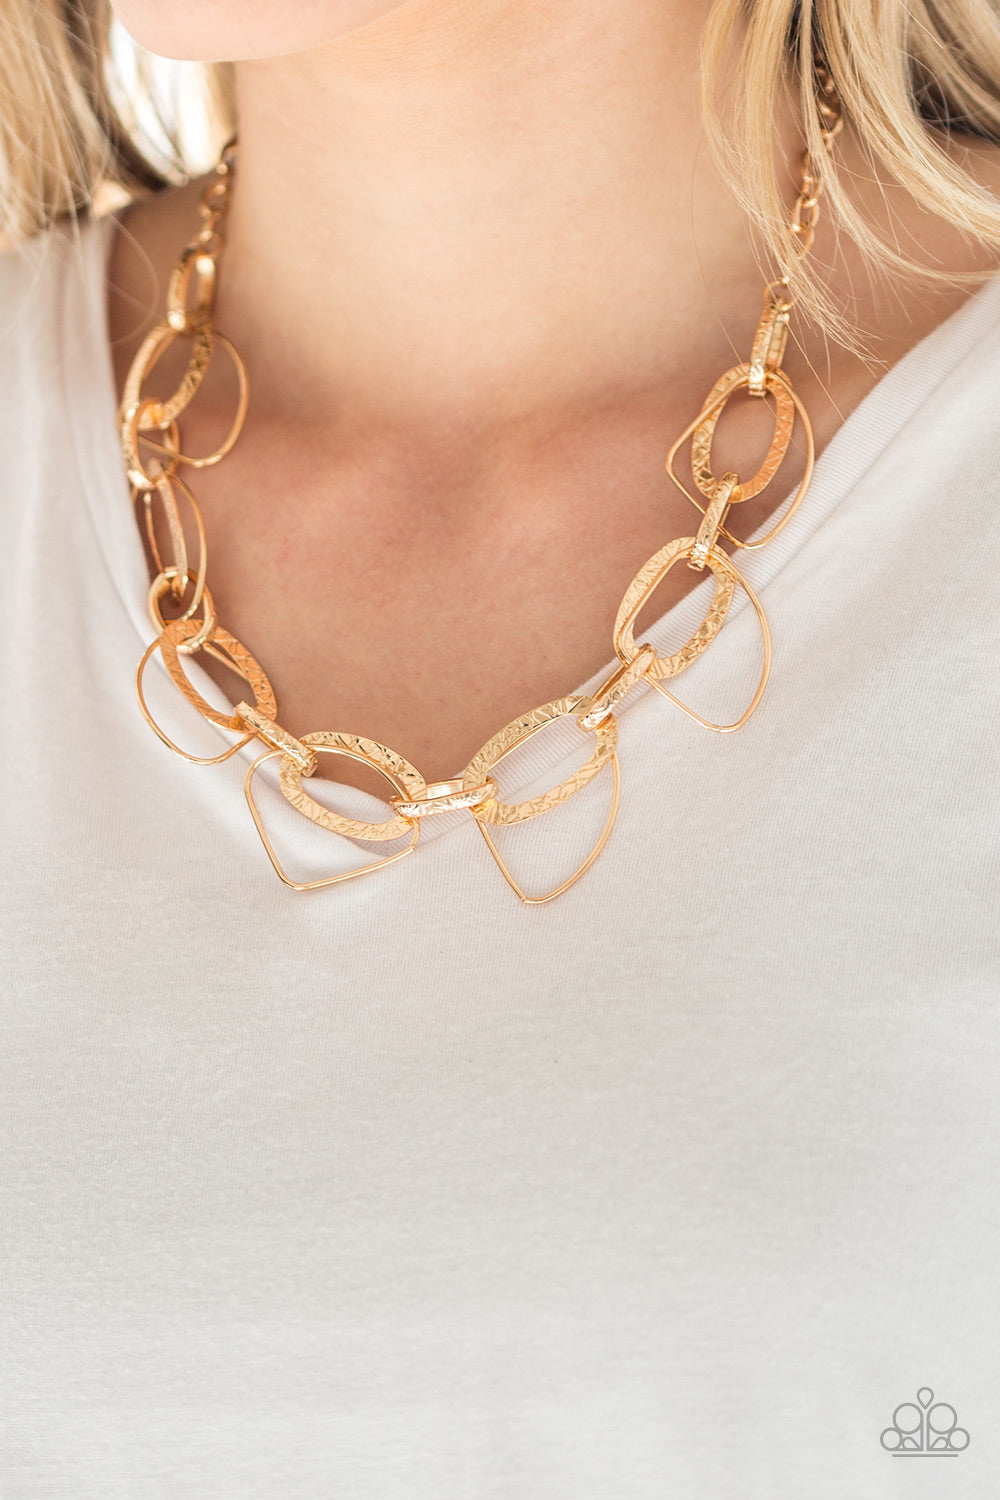 Very Avant-Garde Gold Necklace Paparazzi Accessories